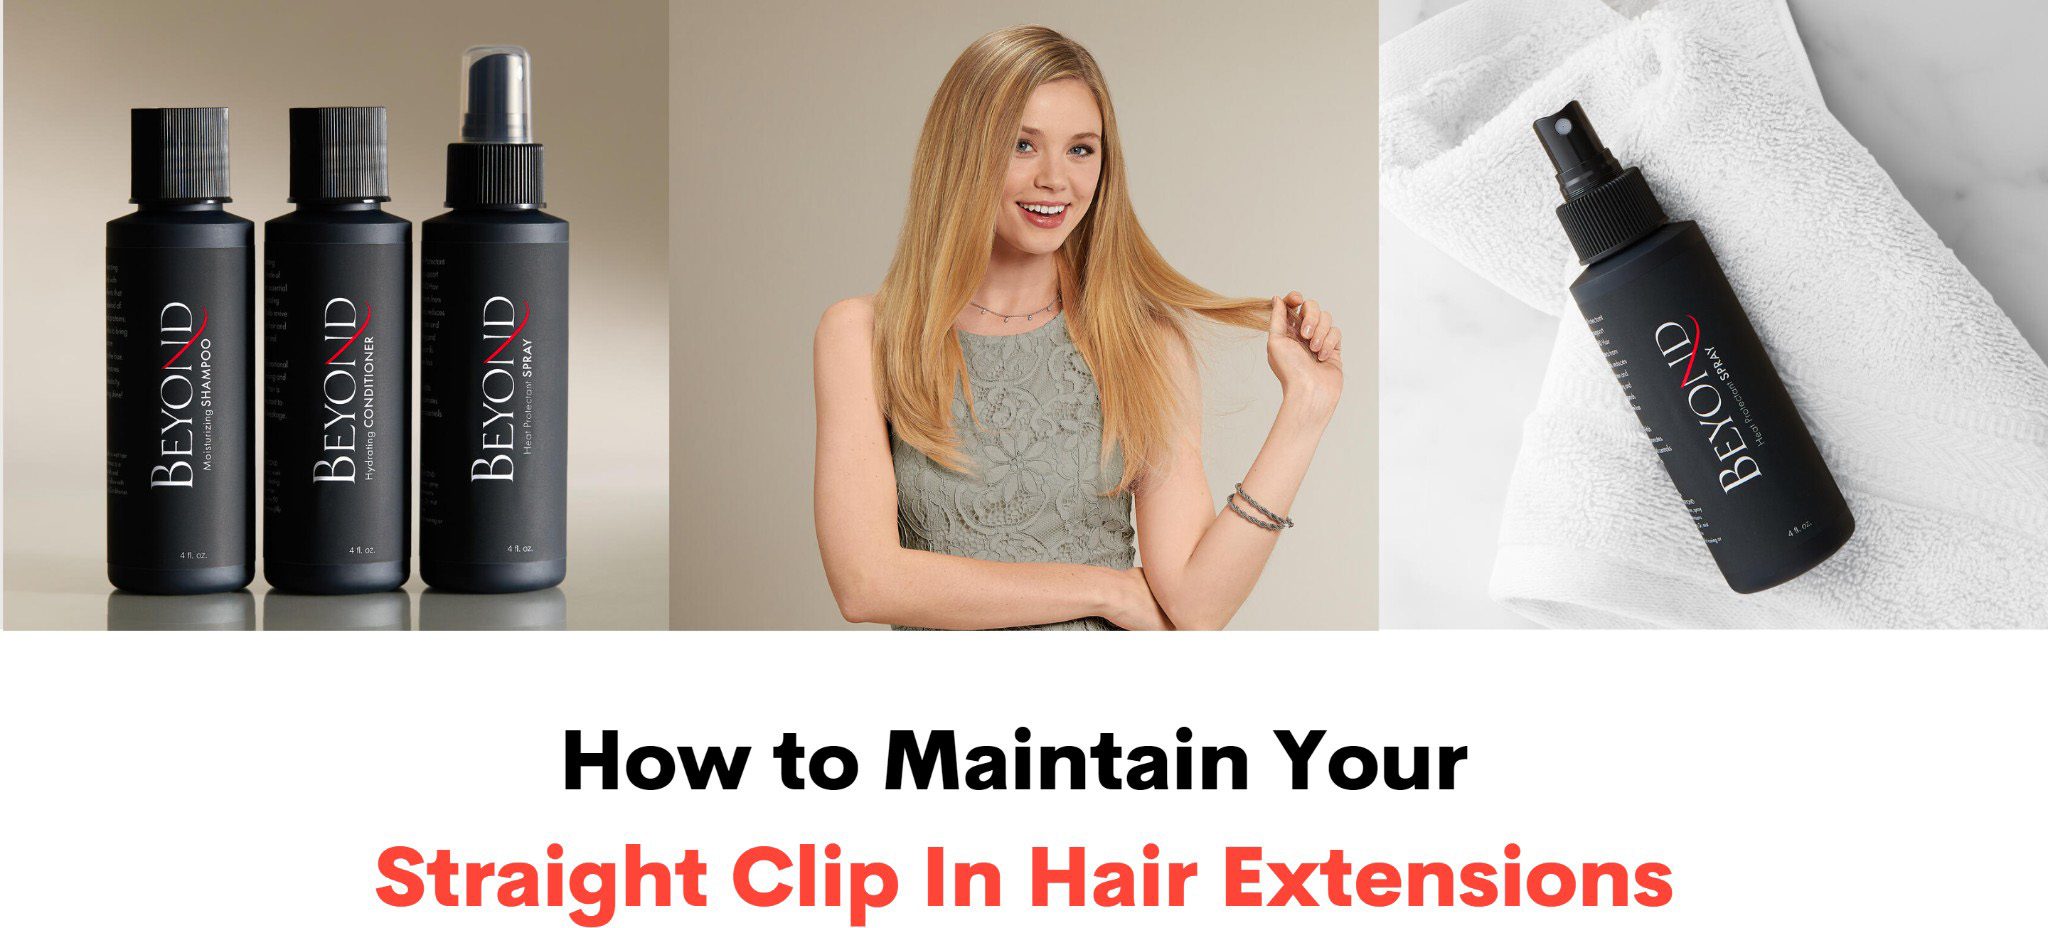 How To Maintain Your Straight Clip In Hair Extensions